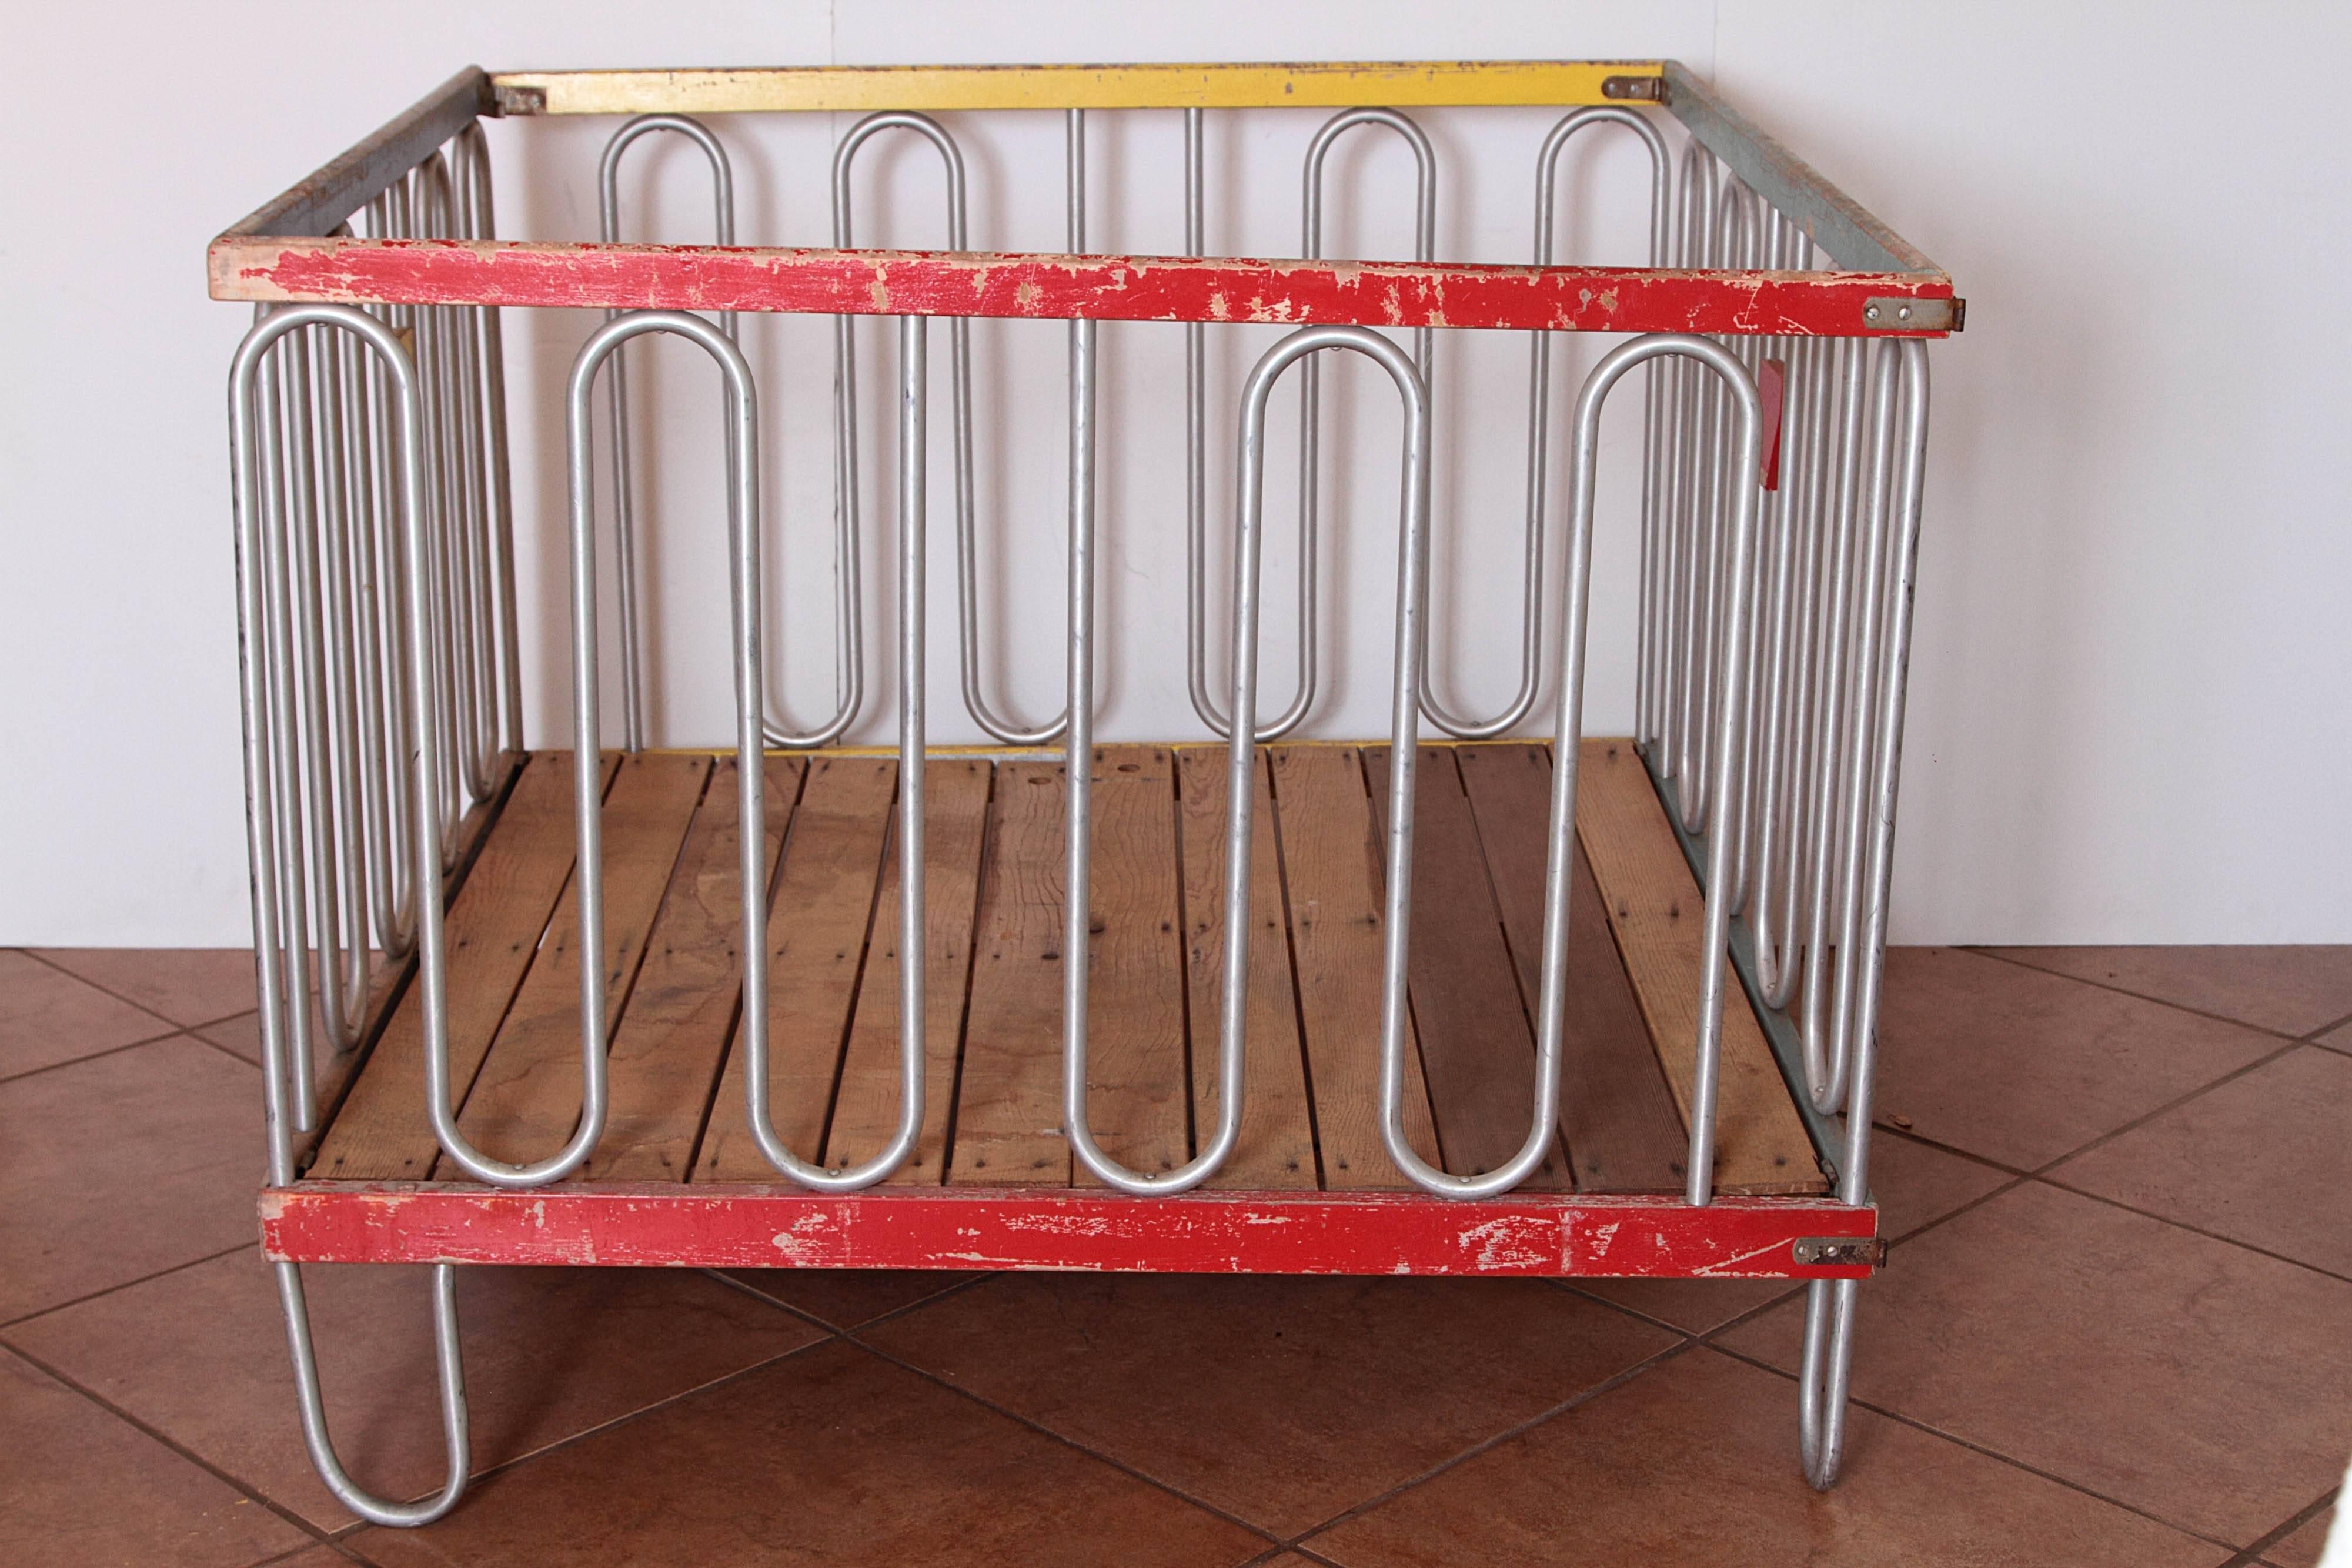 Streamline modernist Art Deco playpen or crib after Gilbert Rohde

Multi-color wooden frame with brushed aluminum tubing sides/feet.
Hinged and latched, fully collapsible to just 4